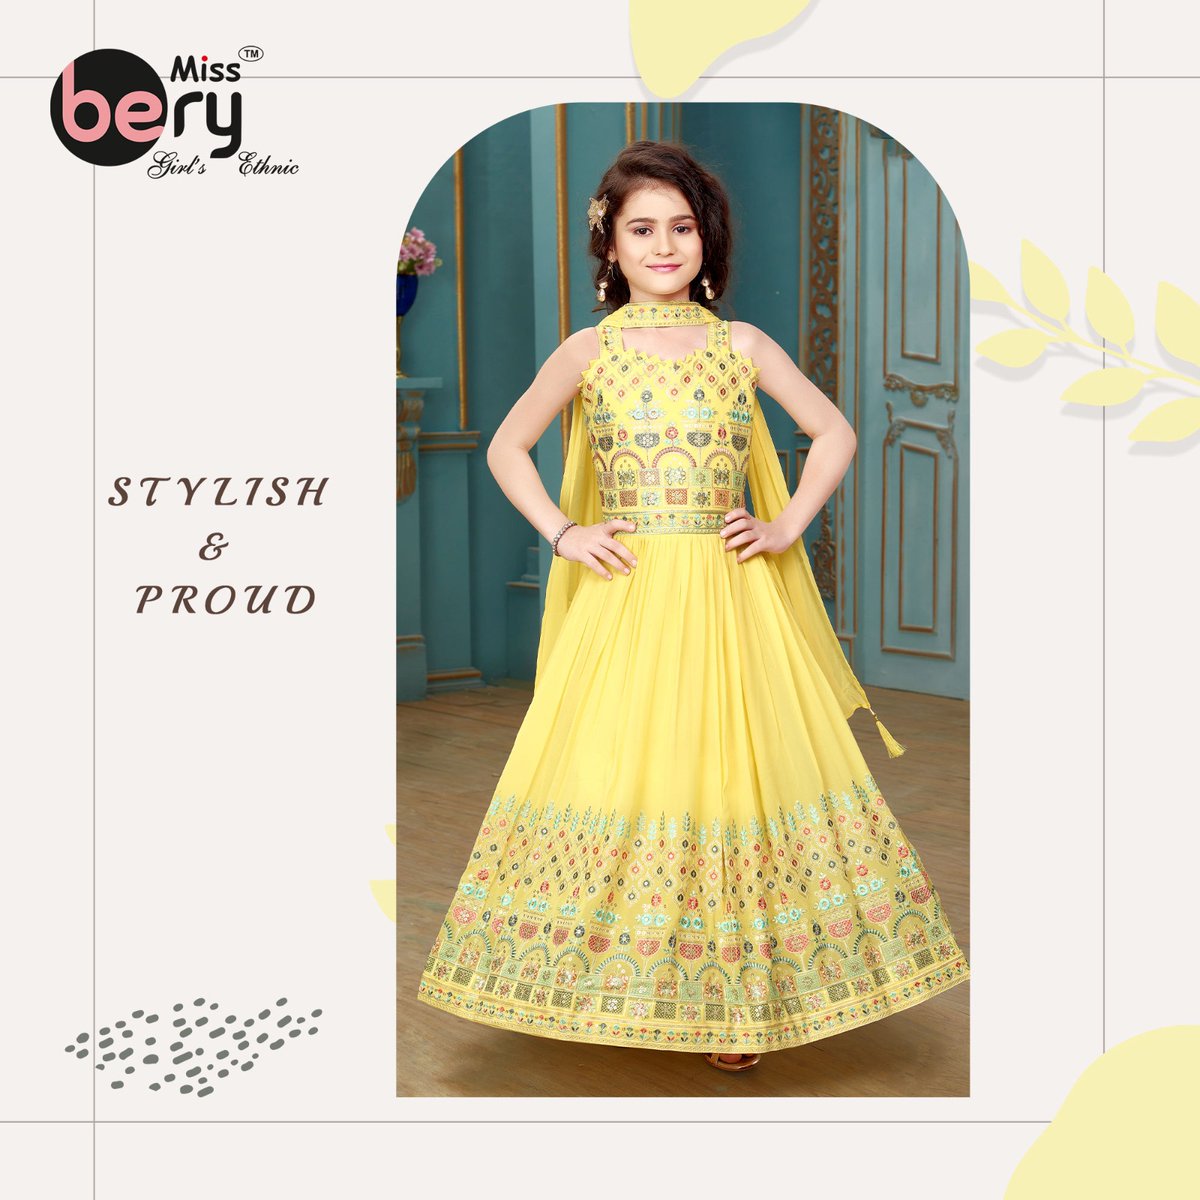 Tiny tot, timeless traditions. 😍😍😍😍

#LittleTraditions #BigSmiles #TinyClothes #MassiveStyle #CutenessOverloaded #EthnicHues #TinyTot #TimelessTraditions #LittleDiva #LittleHero #EthnicAura #CelebratingCulture #OneOutfitAtATime #TraditionalThreads #TinyDreams #missbery